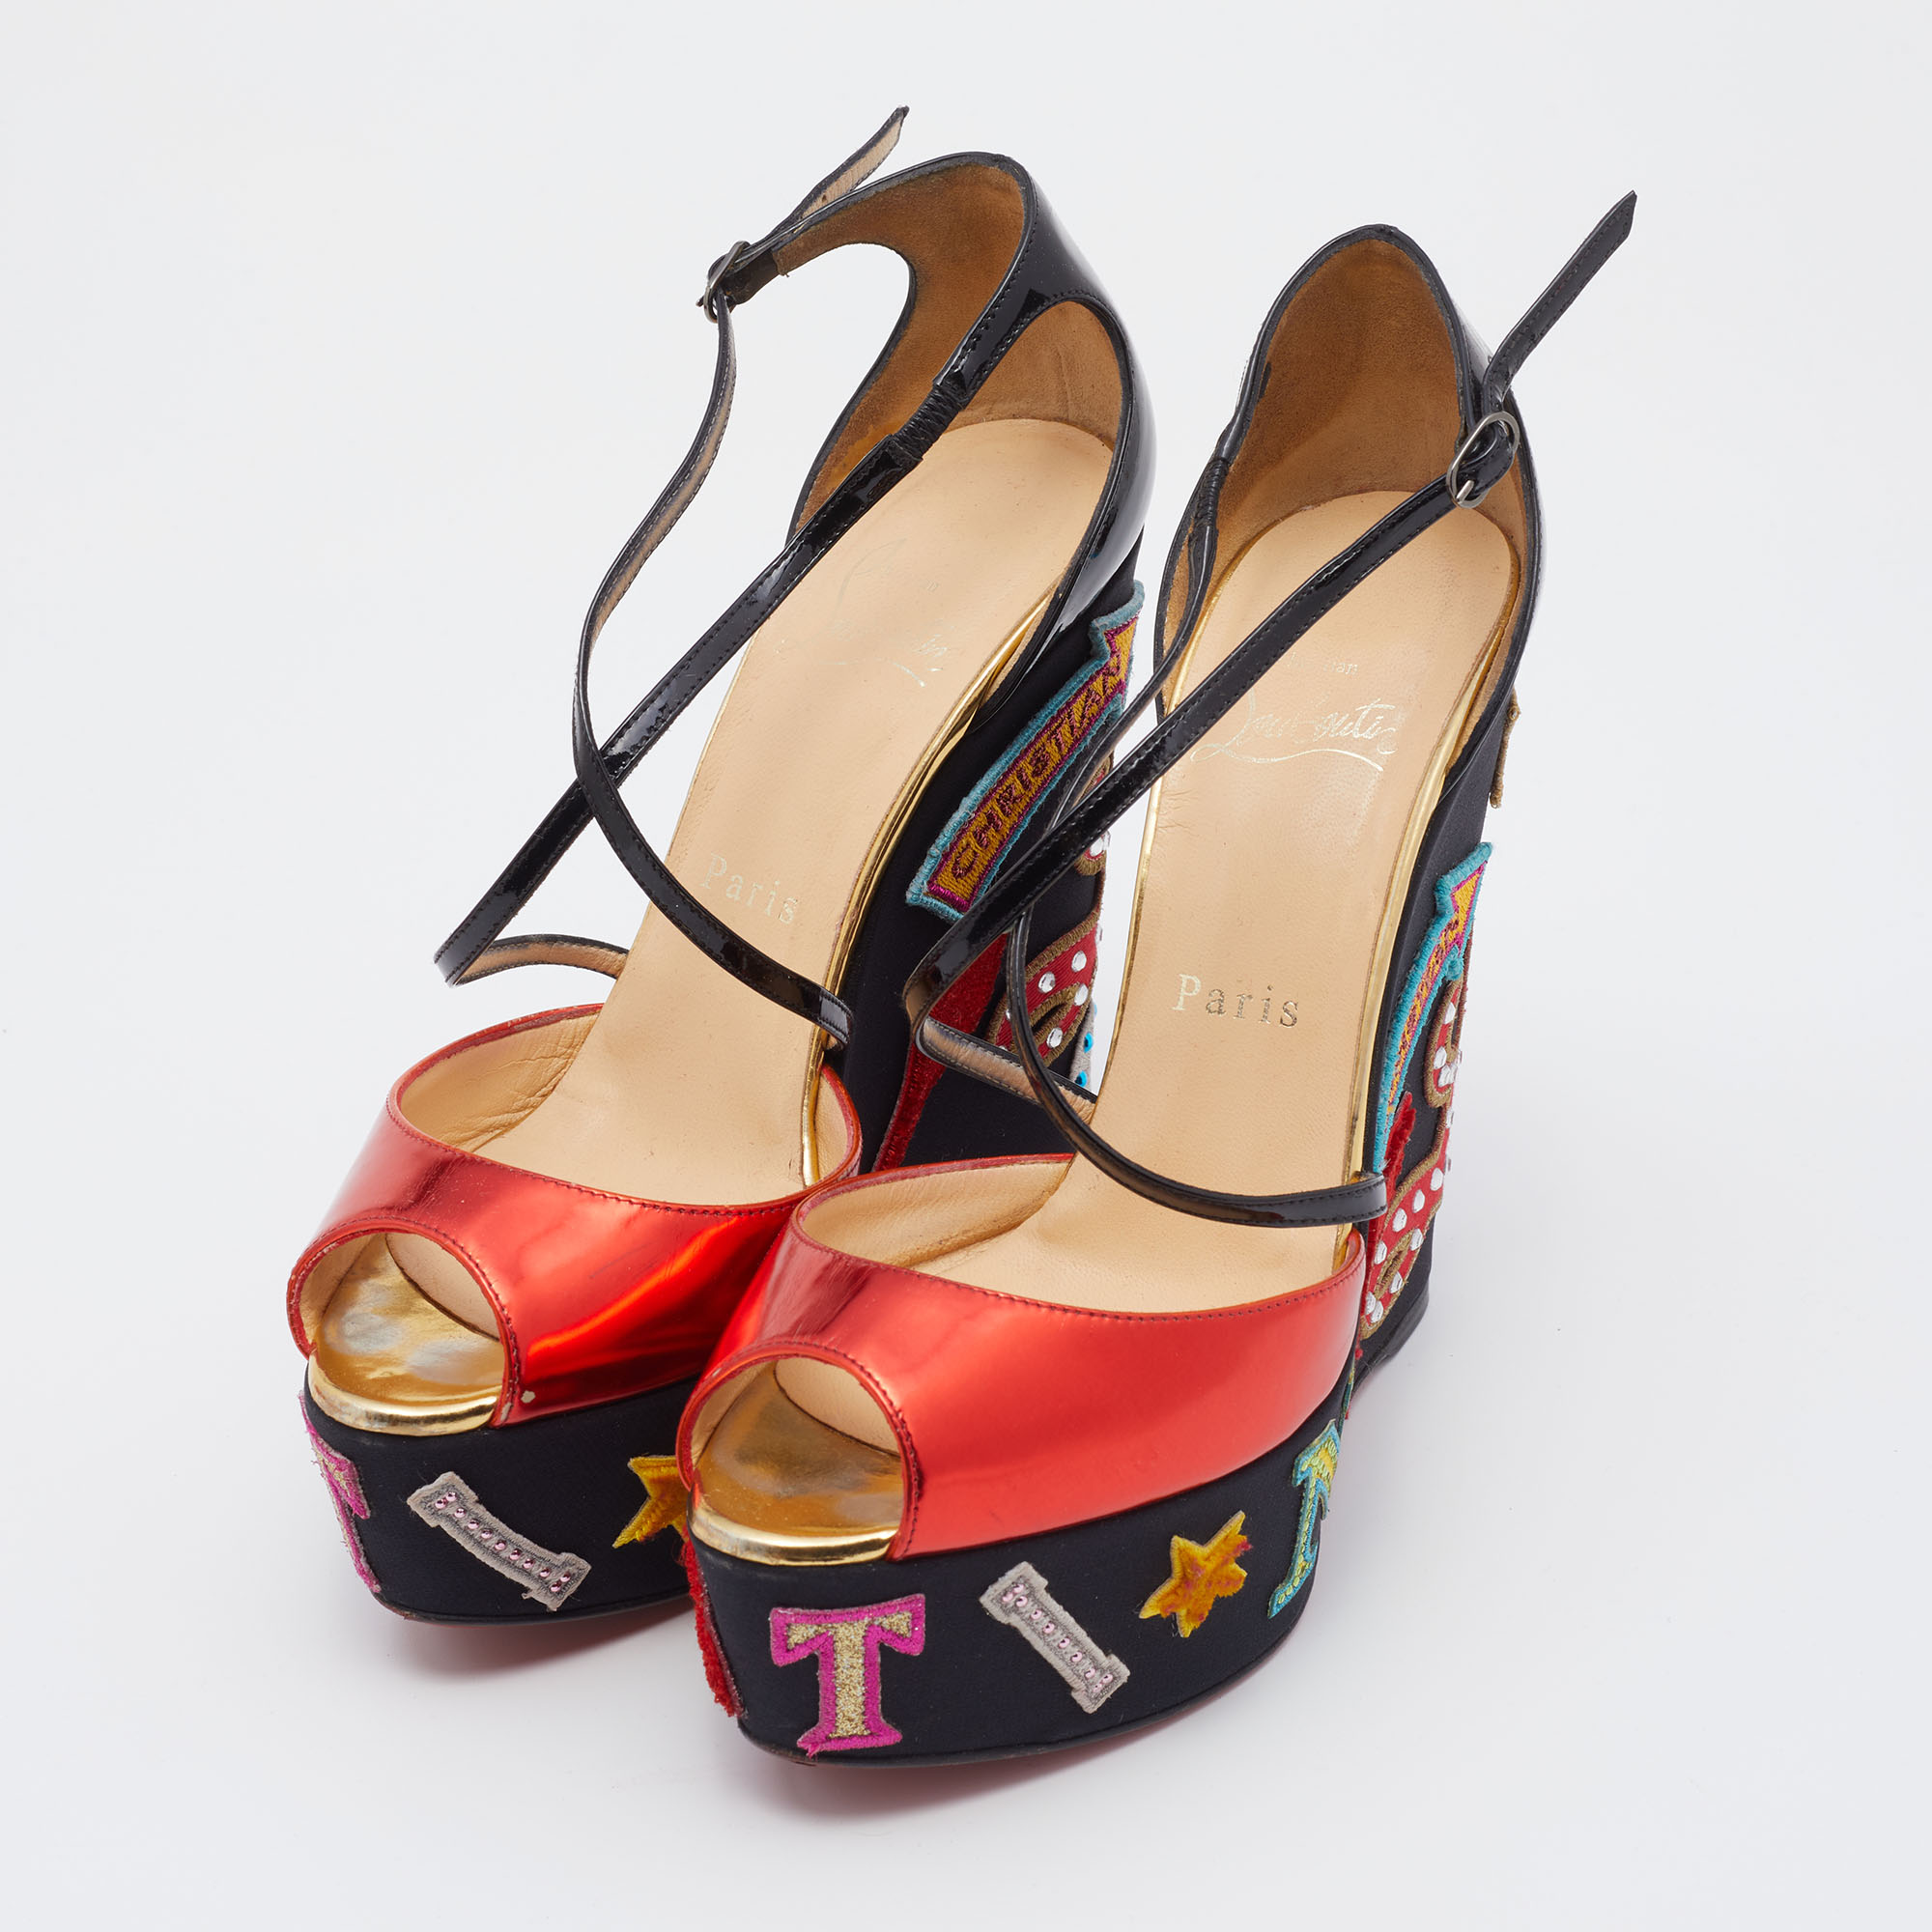 

Christian Louboutin Red/Black Patent And Leather Loubi Zeppa Crisscross Wedges Sandals Size